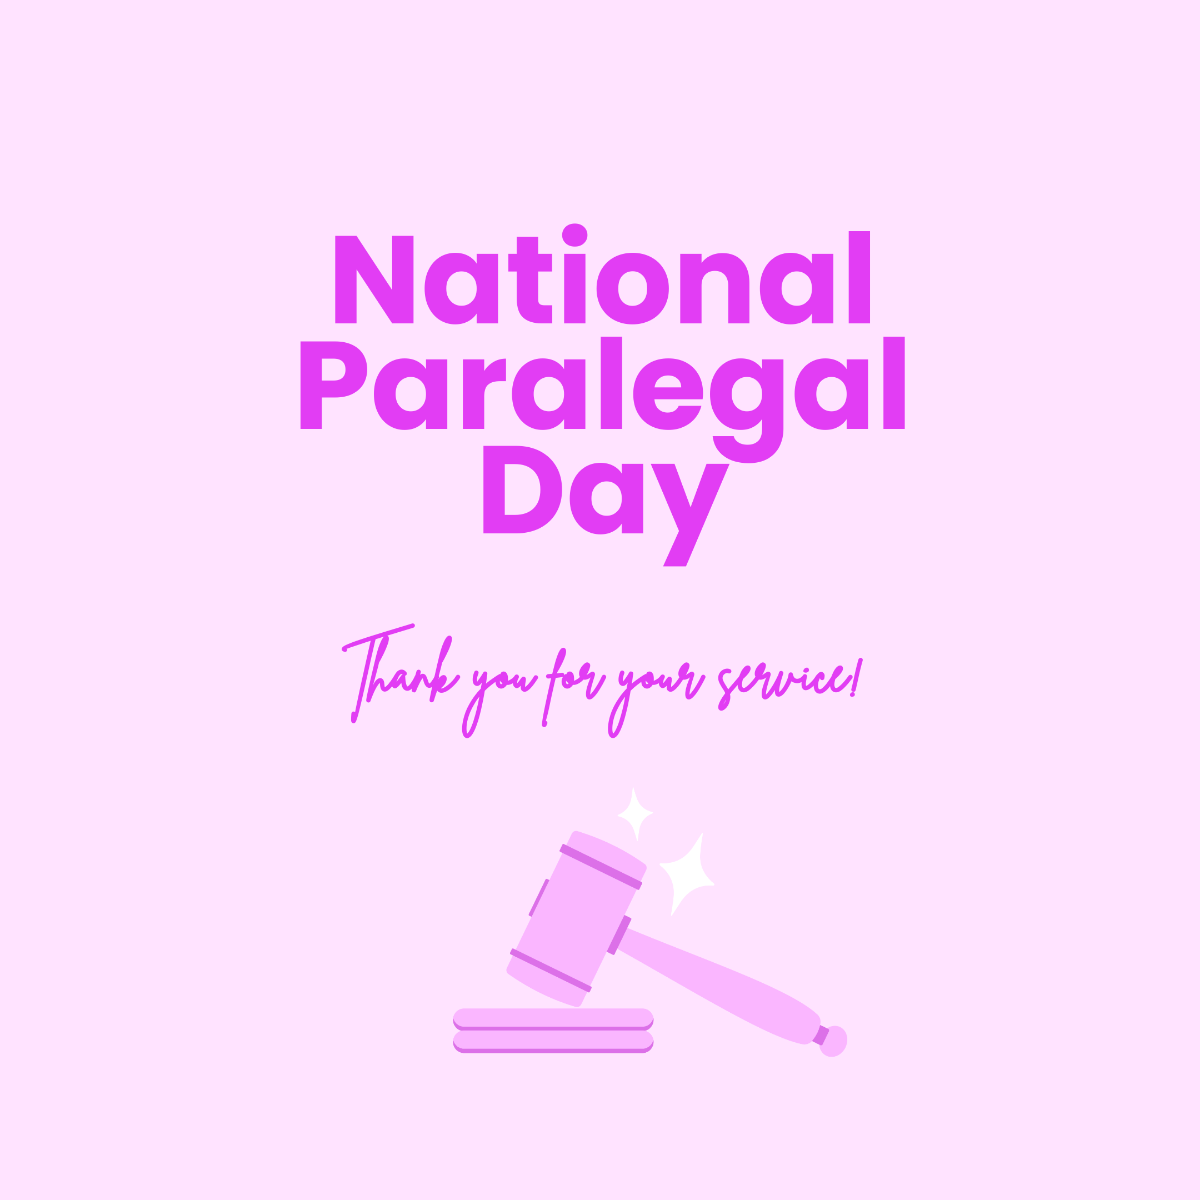 National Paralegal Day Instagram Post Template